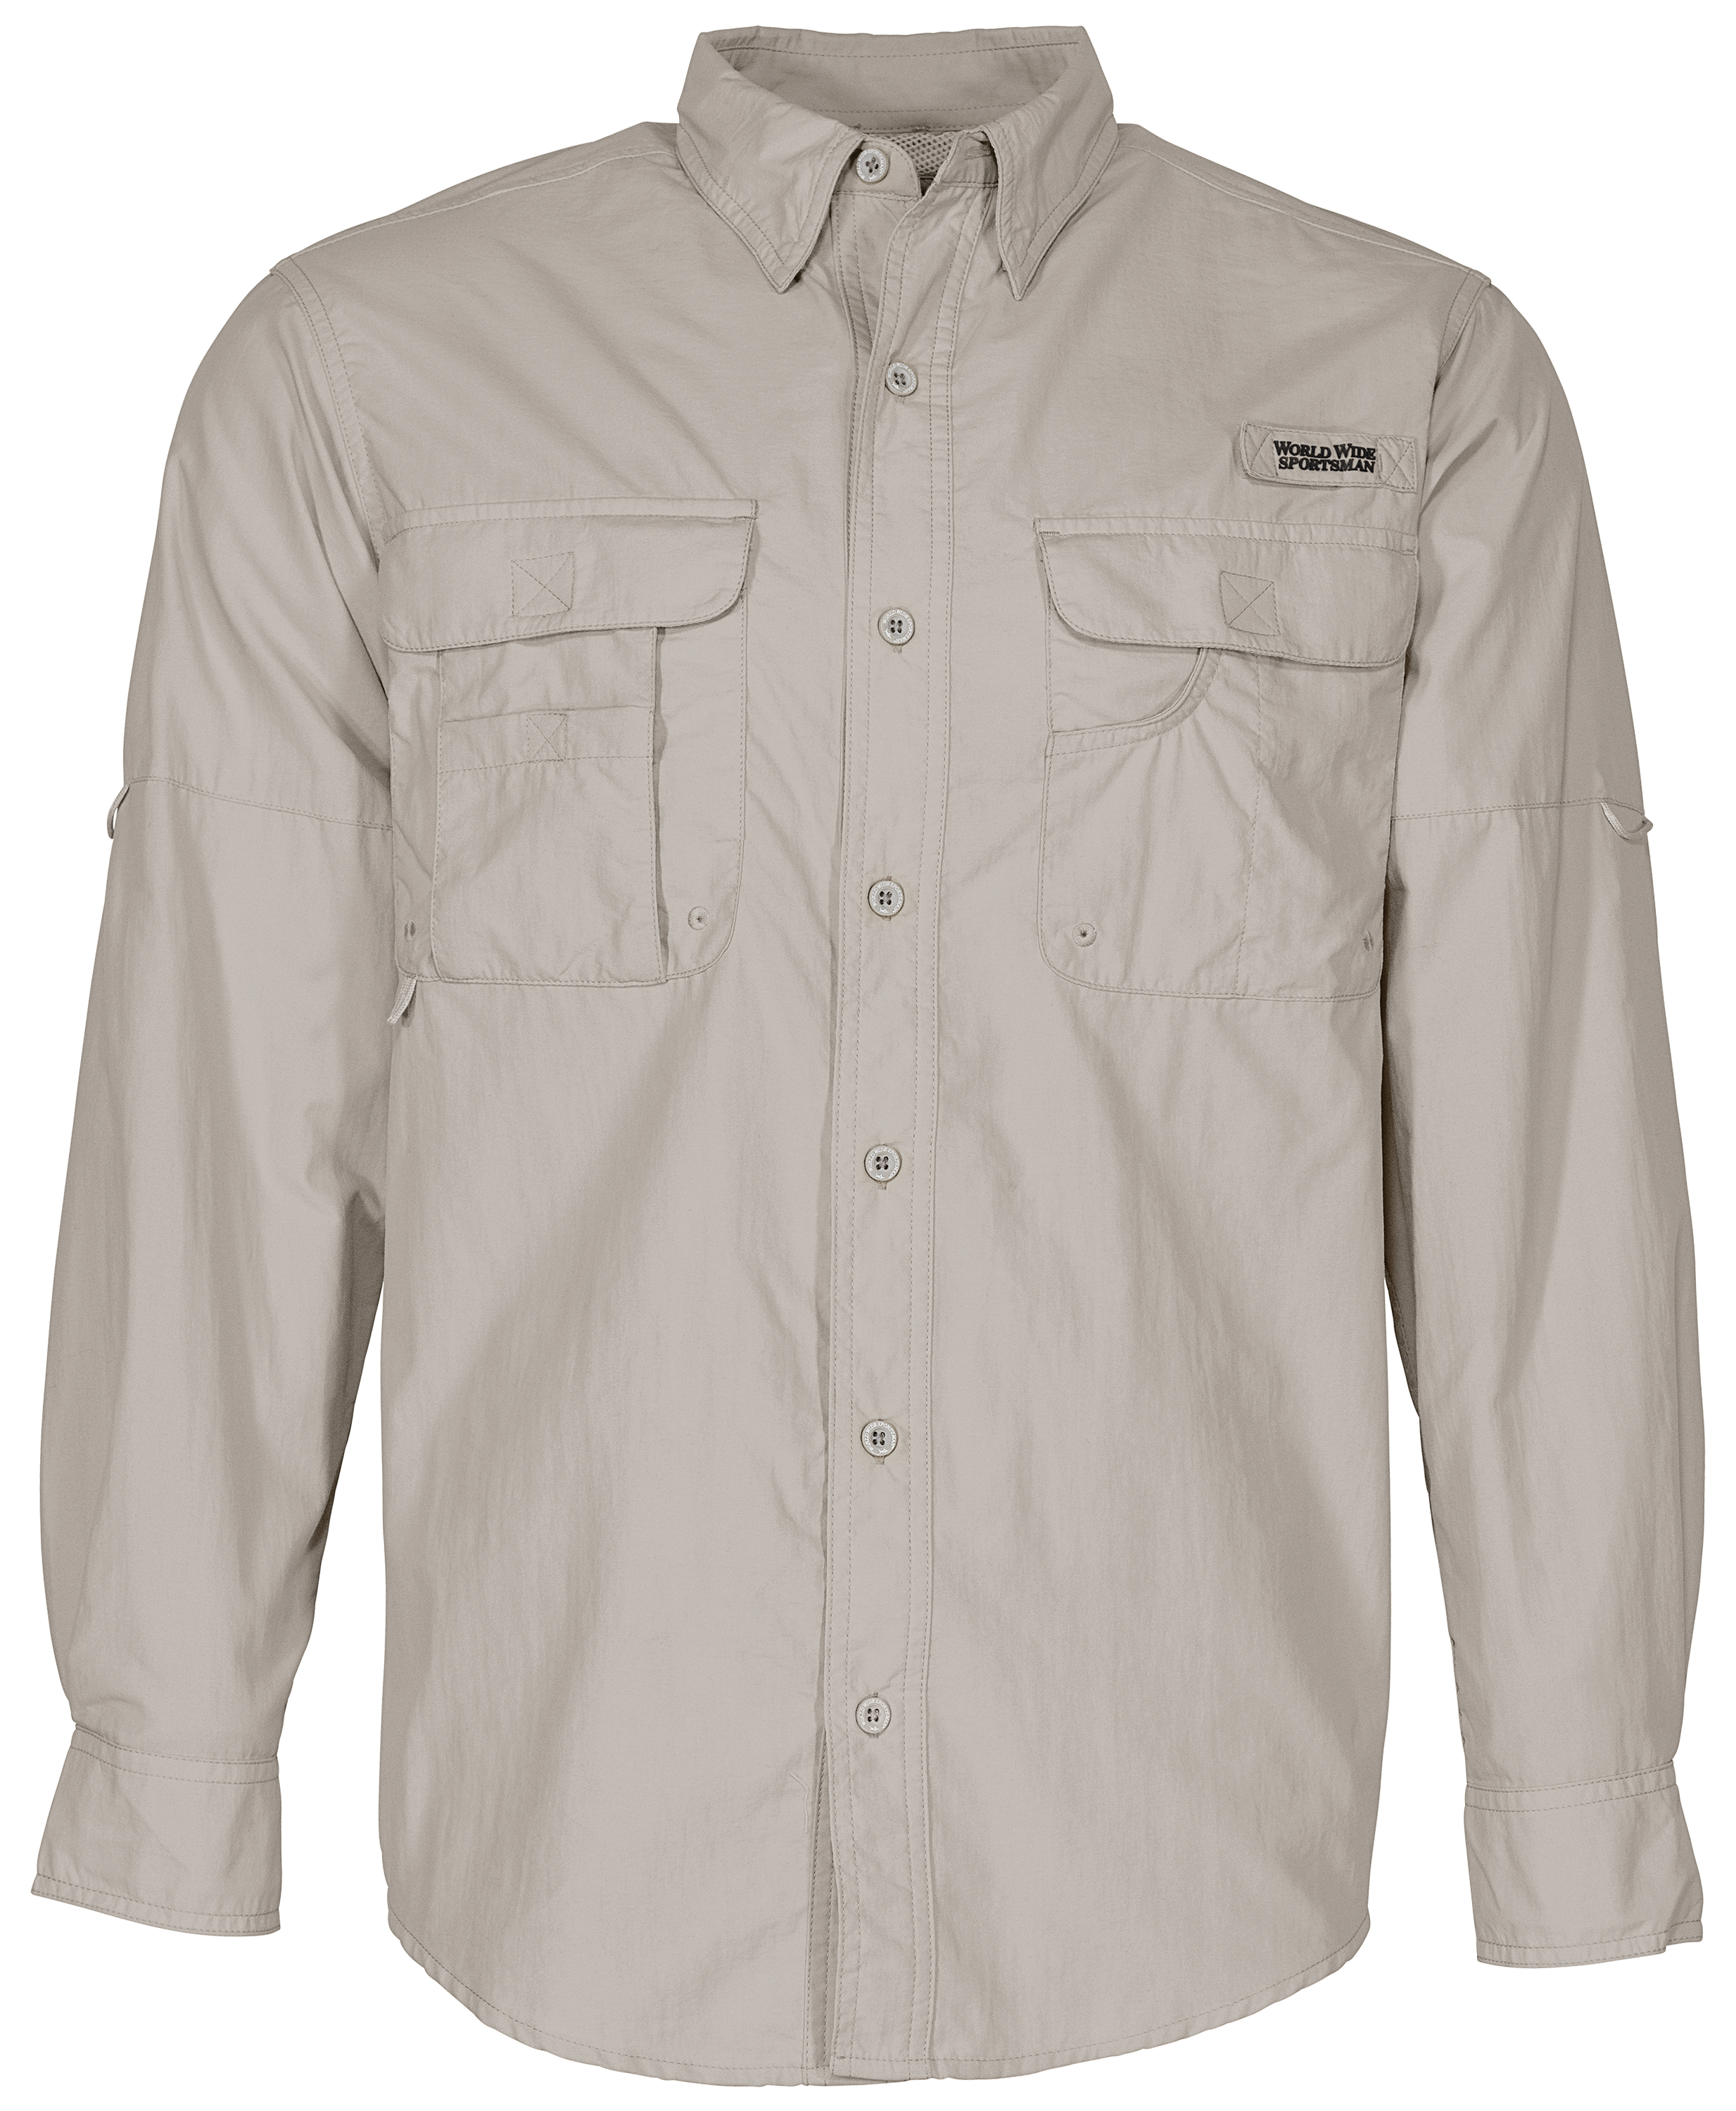 Best Fly Fishing Shirts for Men - Buyer's Guide